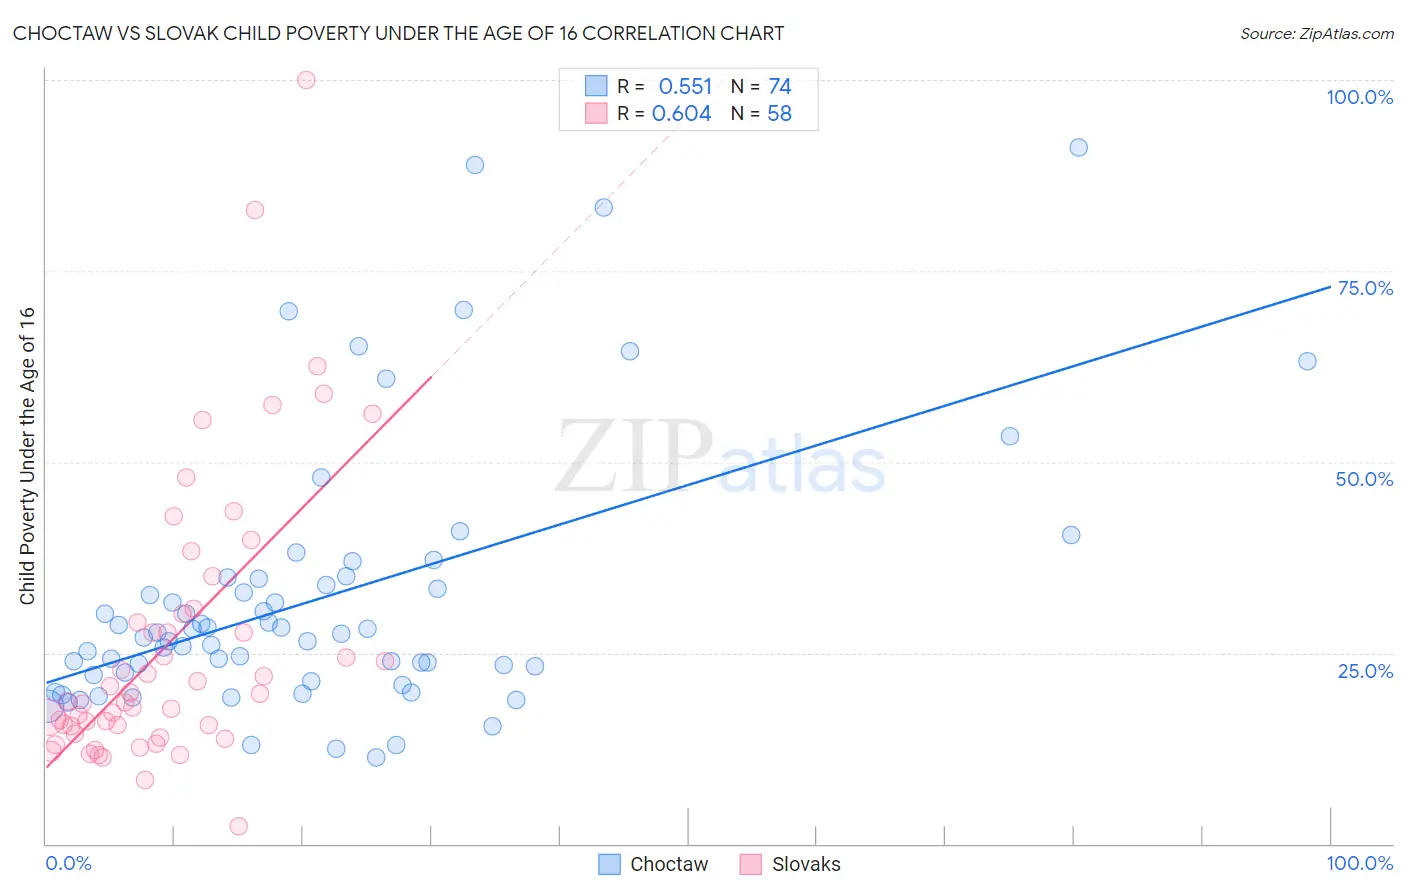 Choctaw vs Slovak Child Poverty Under the Age of 16